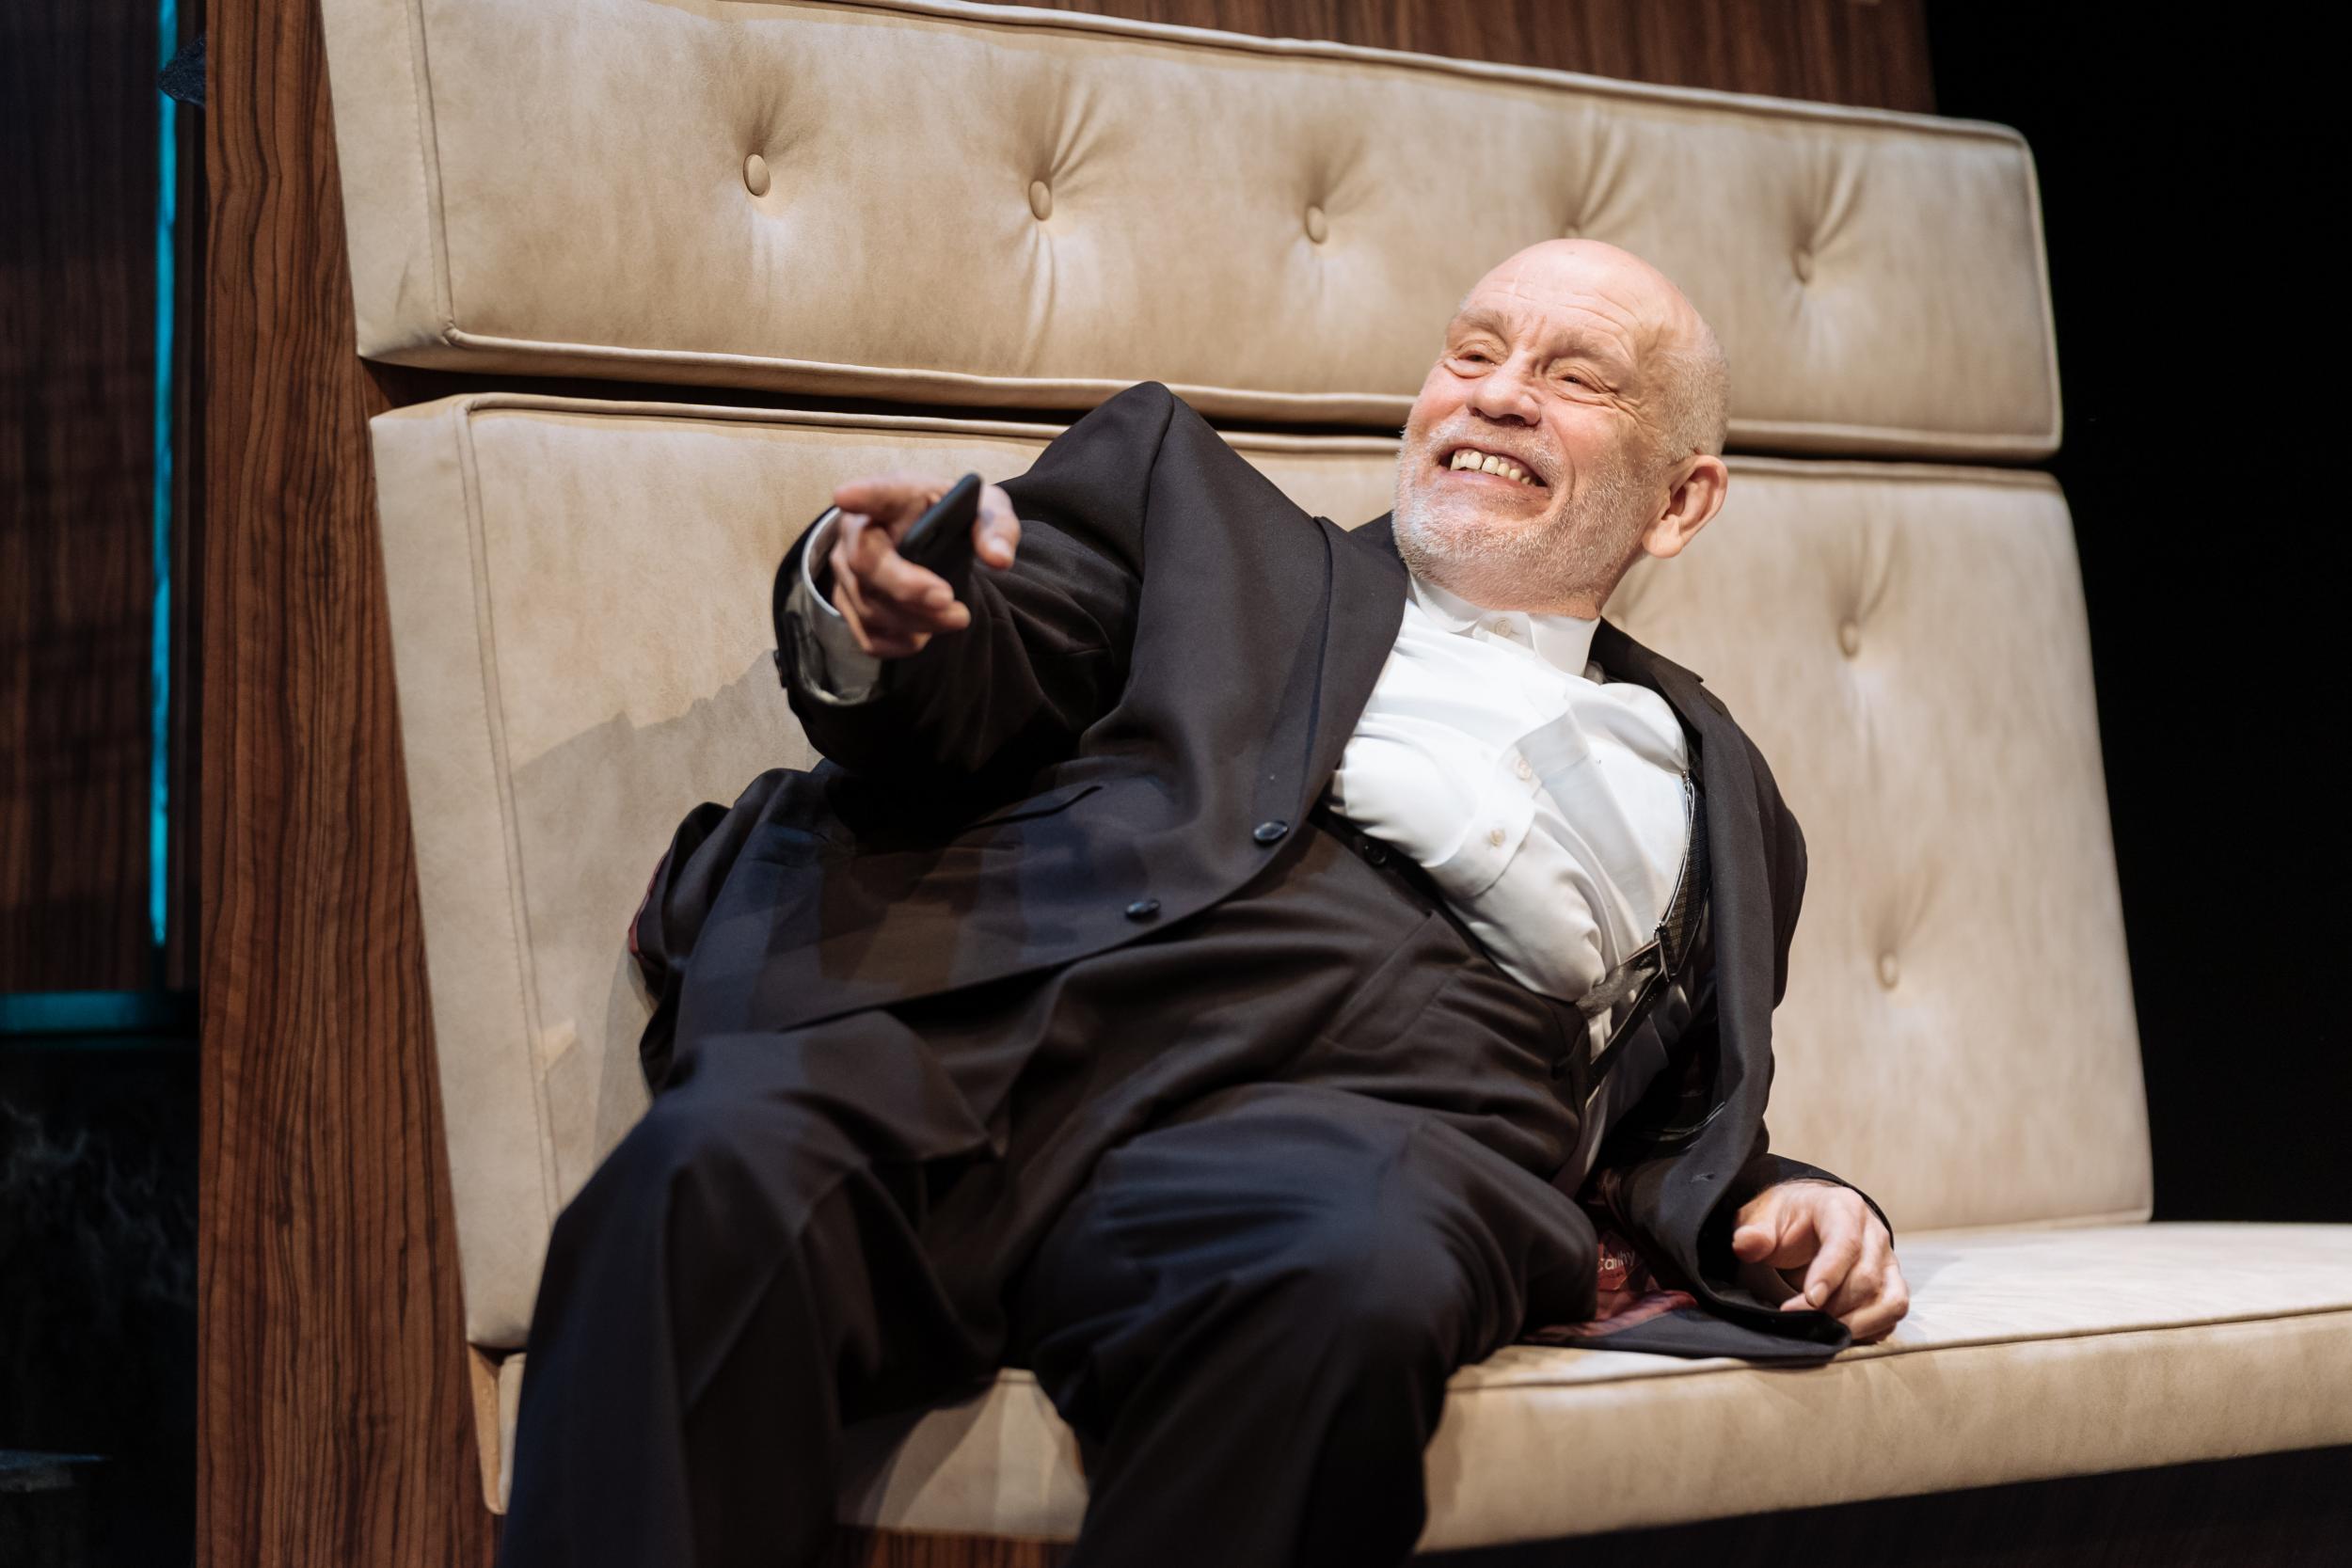 Malkovich as depraved Hollywood mogul Barney Fein in David Mamet’s 'Bitter Wheat' at the Garrick in 2019